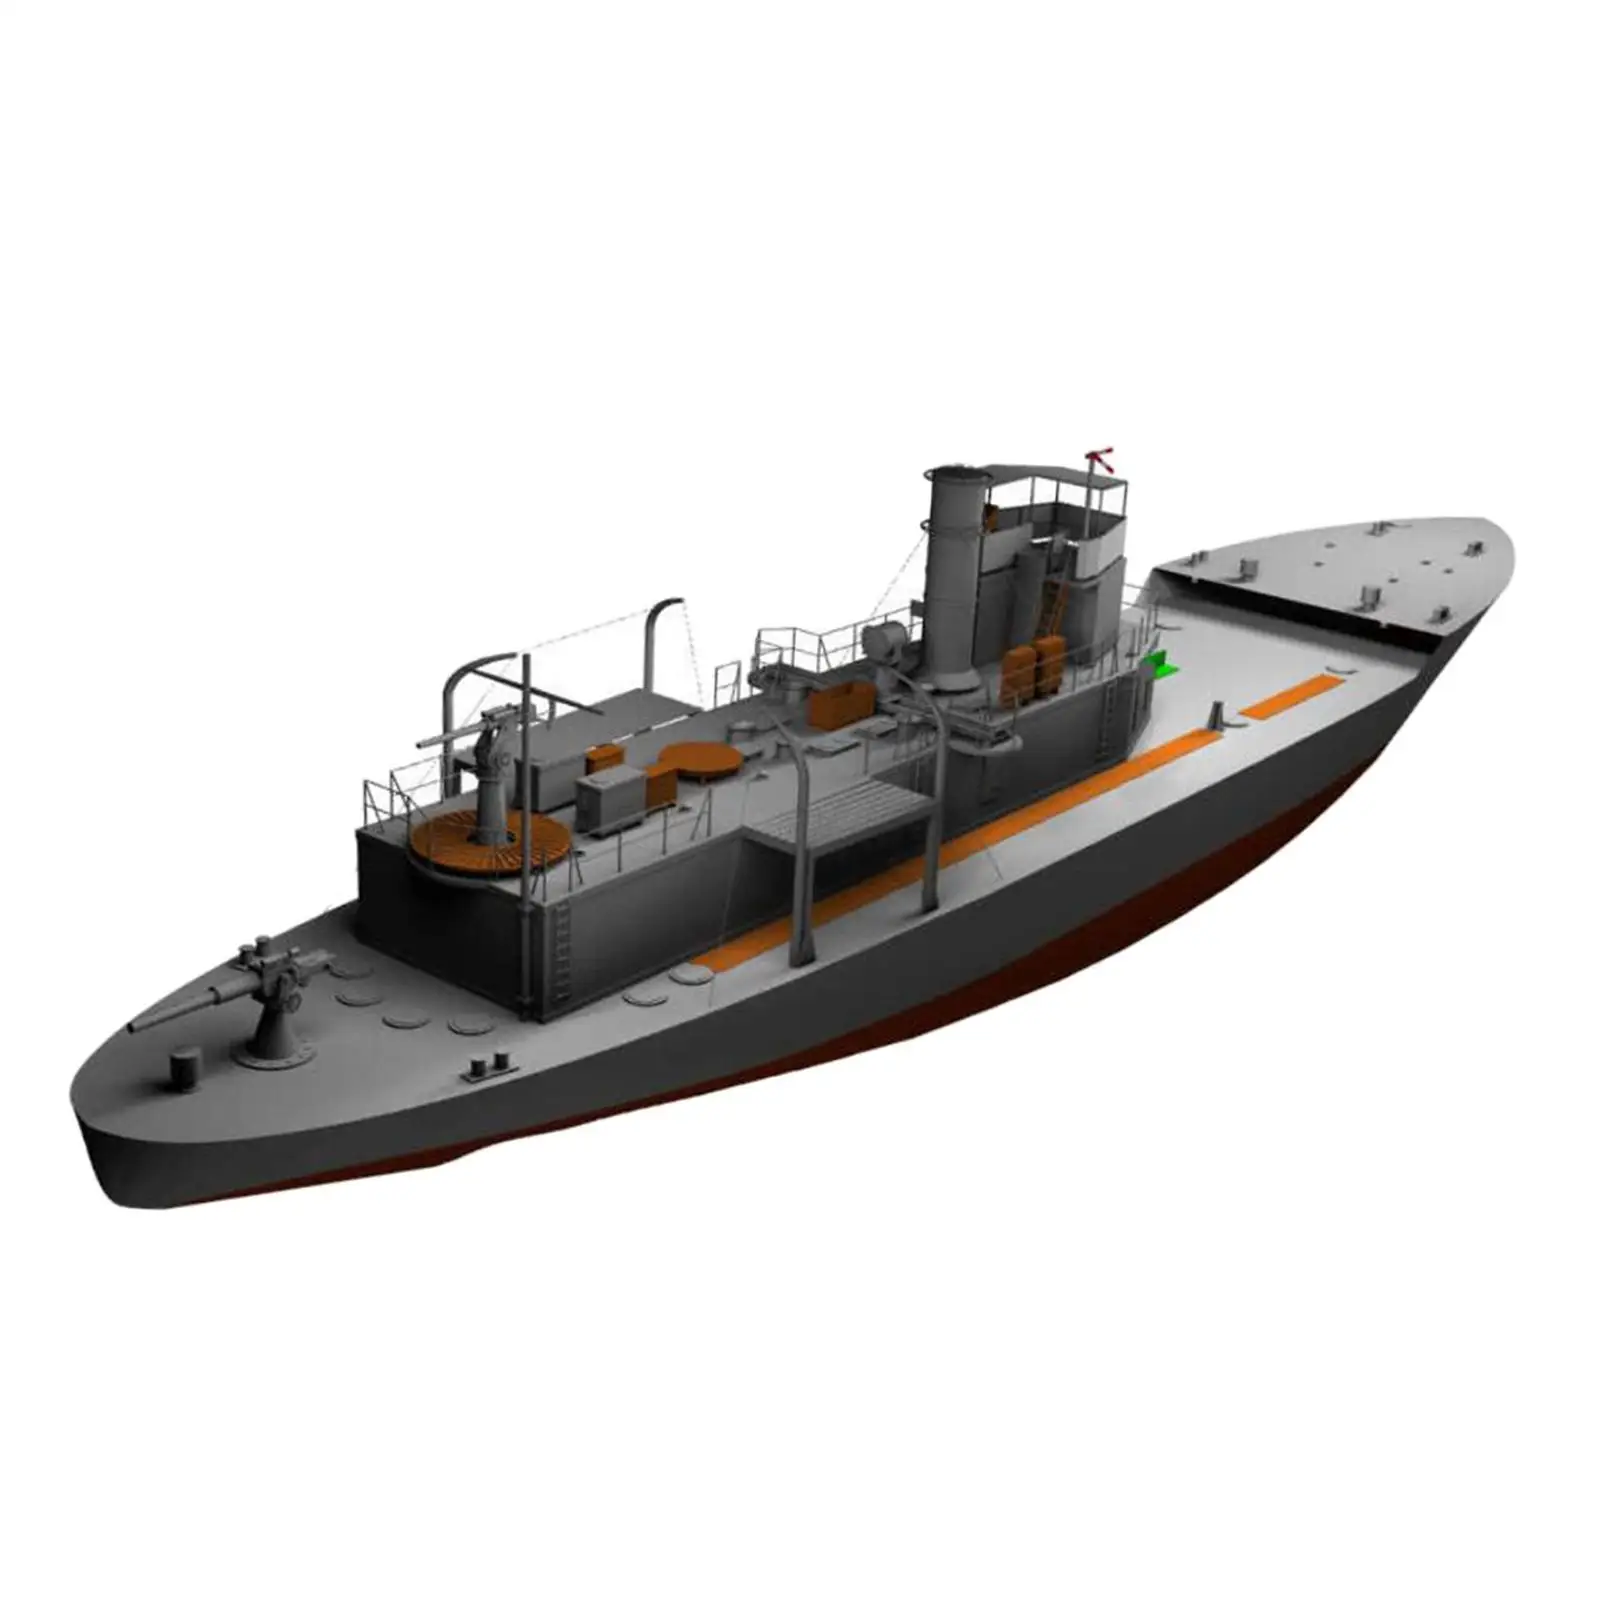 1/100 Patrol Boat Kits Papercraft DIY Assemble Toy for Adults Kids Children